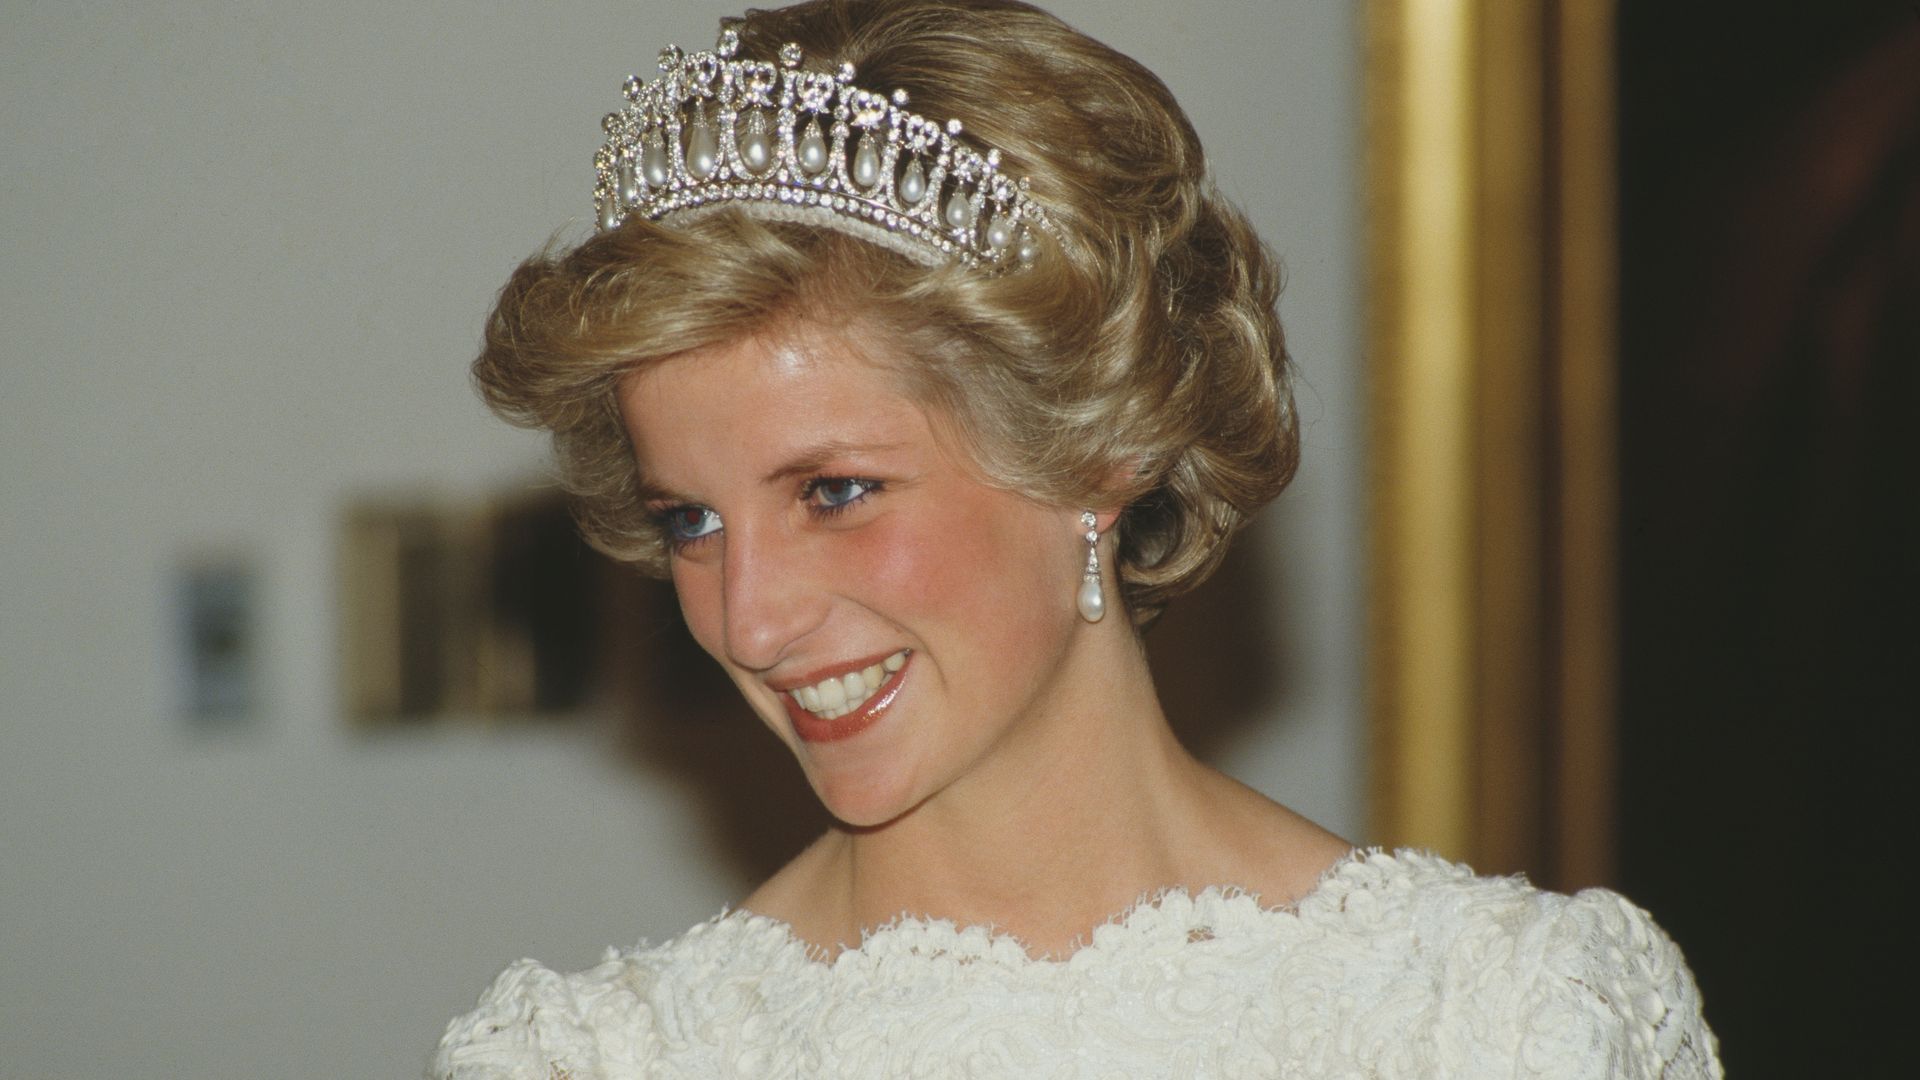 Diana, Princess of Wales in a white lace dress and a tiara